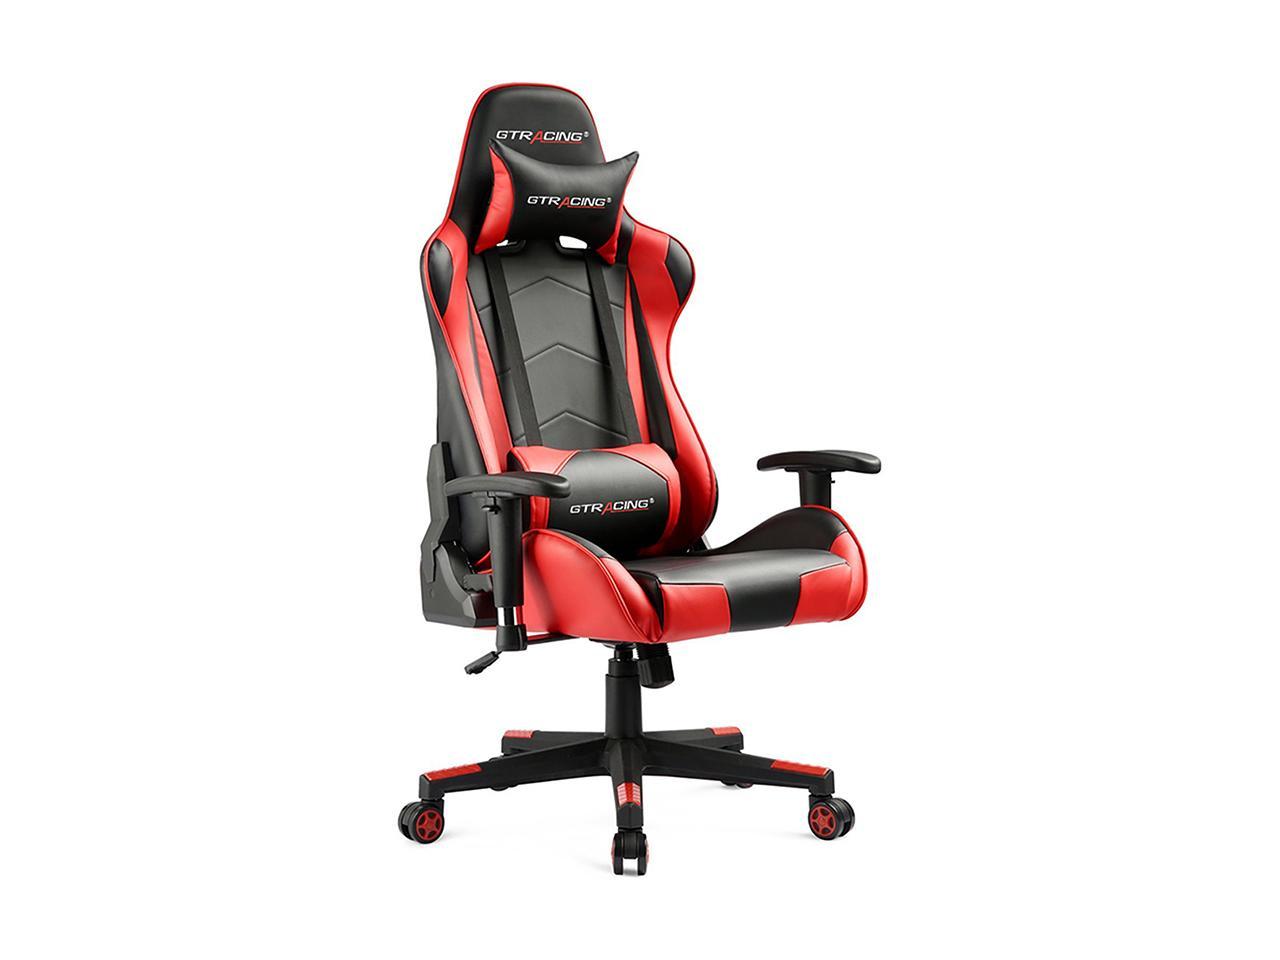 GTRACING Ergonomic Backrest and Seat Height Adjustment Swivel Lumbar Support Gaming Chair  Tilt eSports Chair (Black/Red)